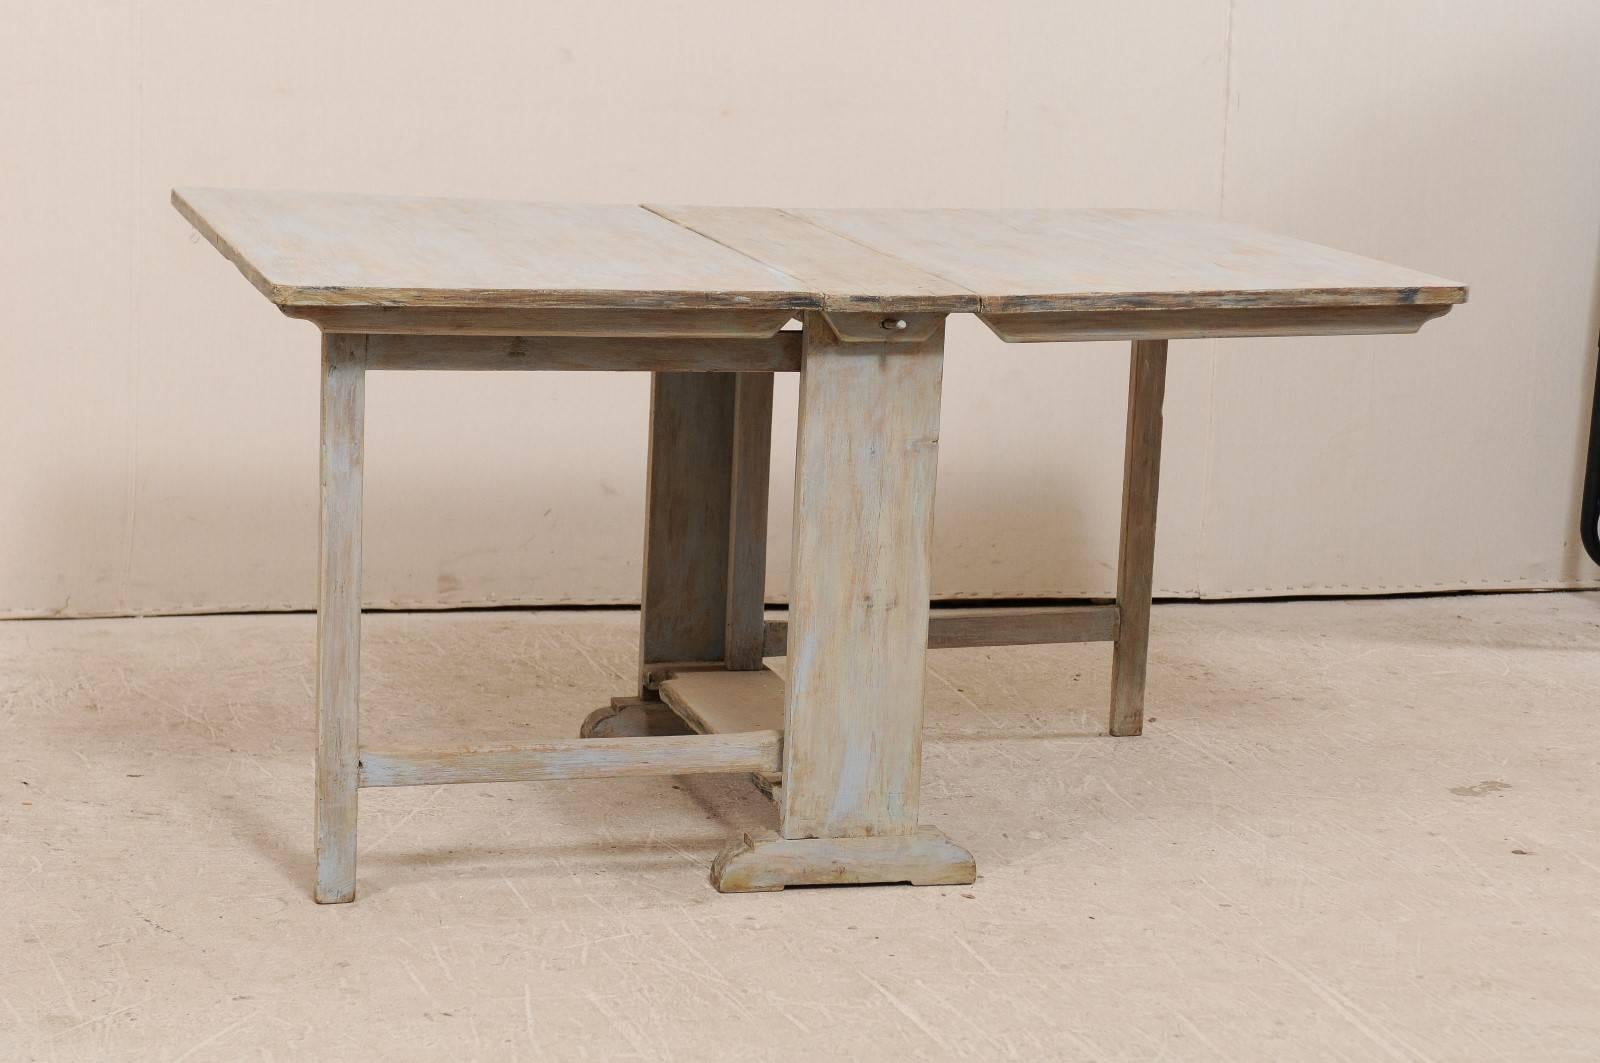 A Swedish, 19th century painted wood drop-leaf and gate-leg table. This antique Swedish table from the mid-19th century features two drop-leaf sides that will extend the table to 59